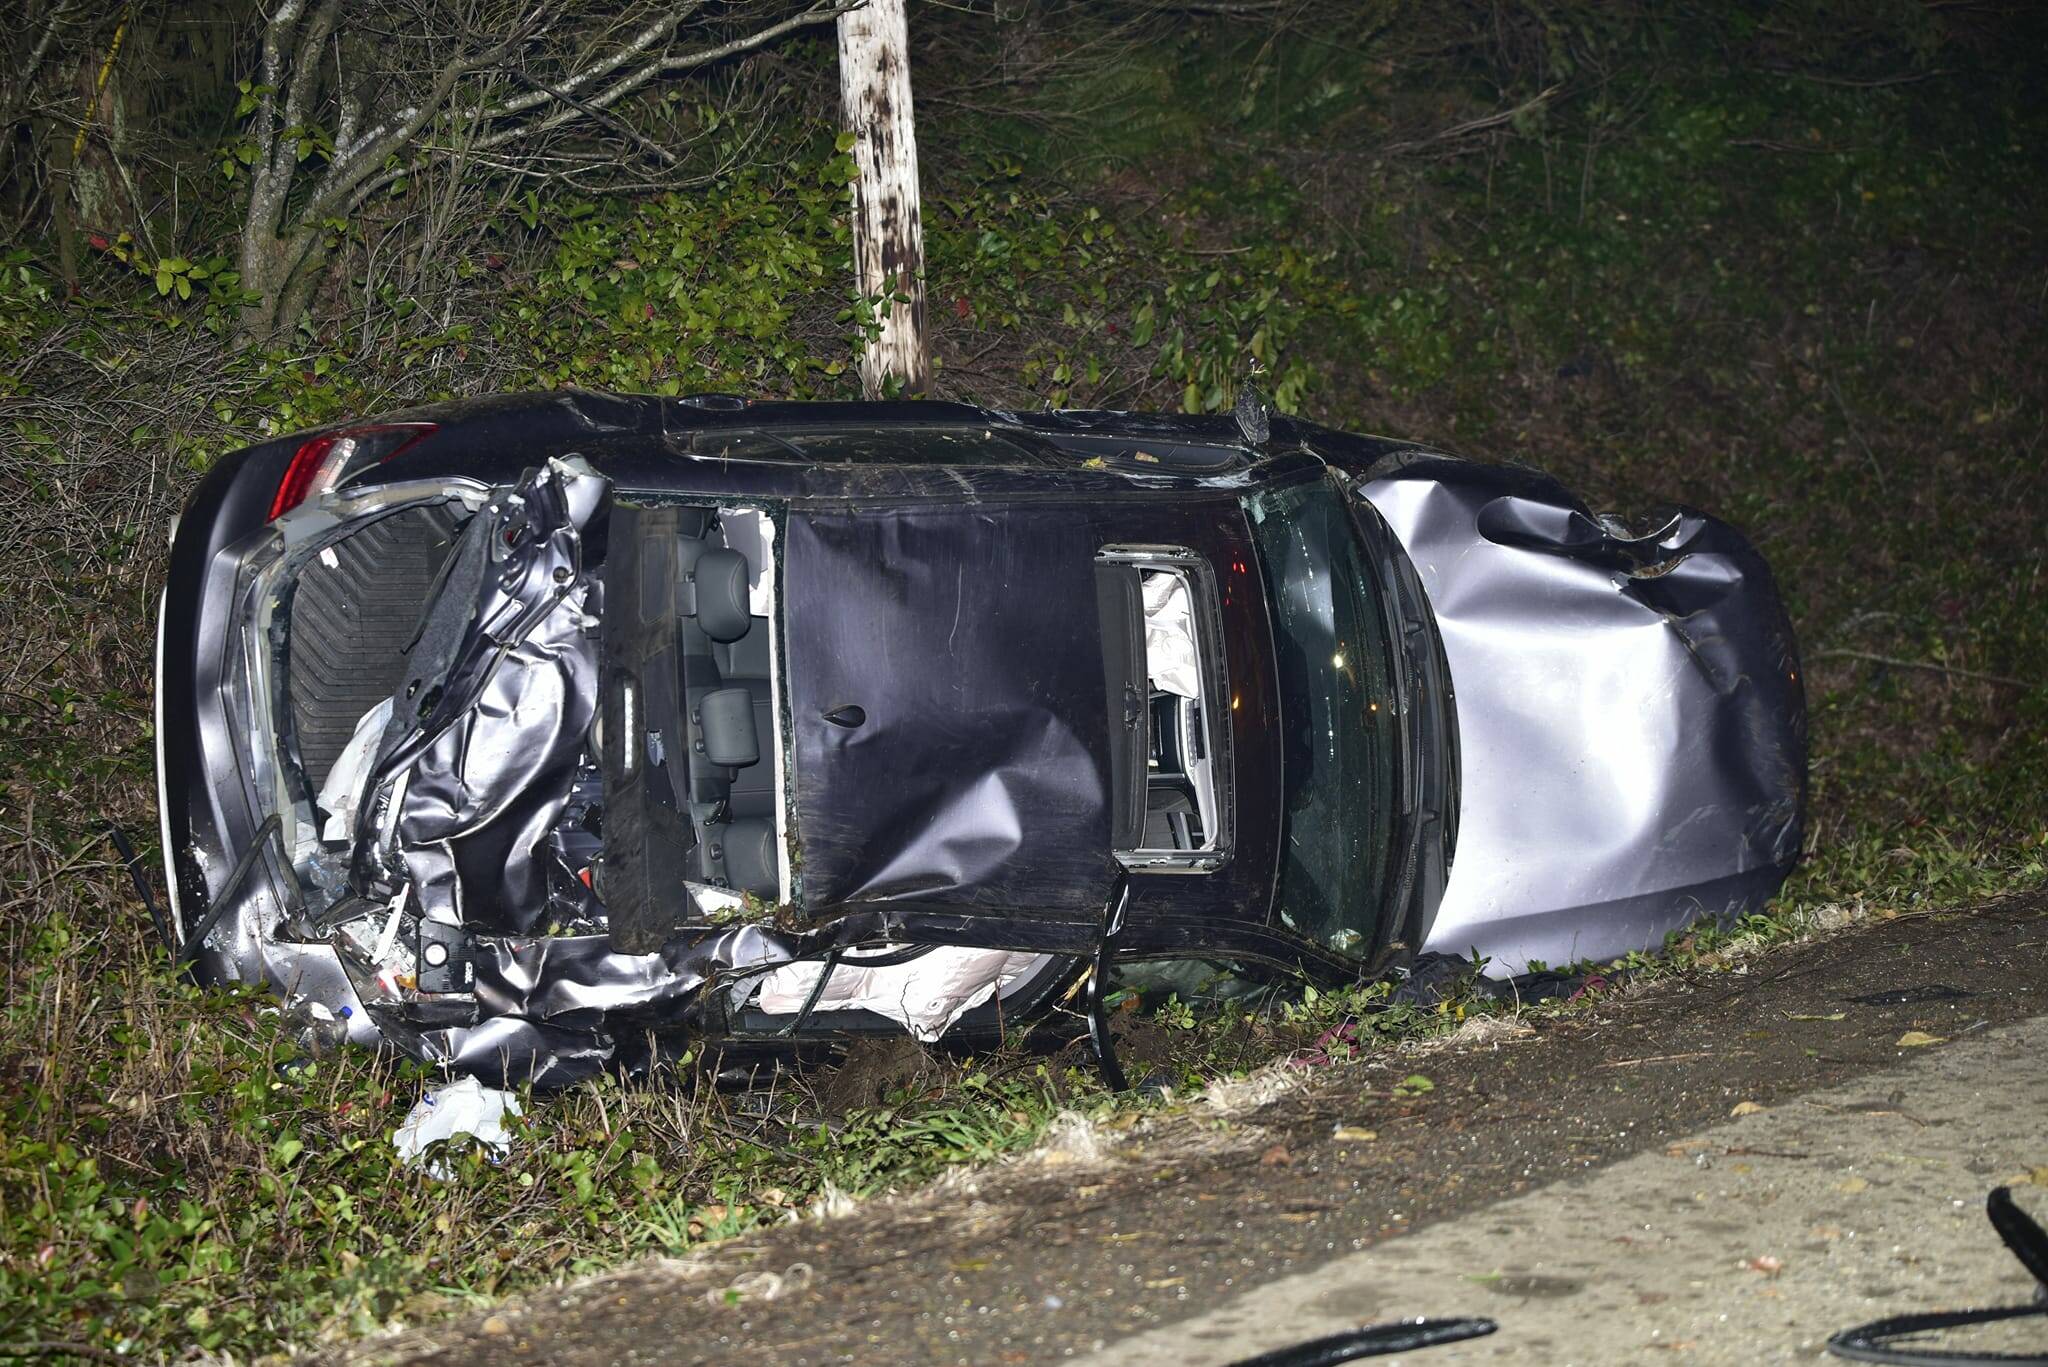 A Raymond man was ejected from his vehicle in a single-vehicle crash on Wednesday. (Ezra McCampbell / For The Daily World)